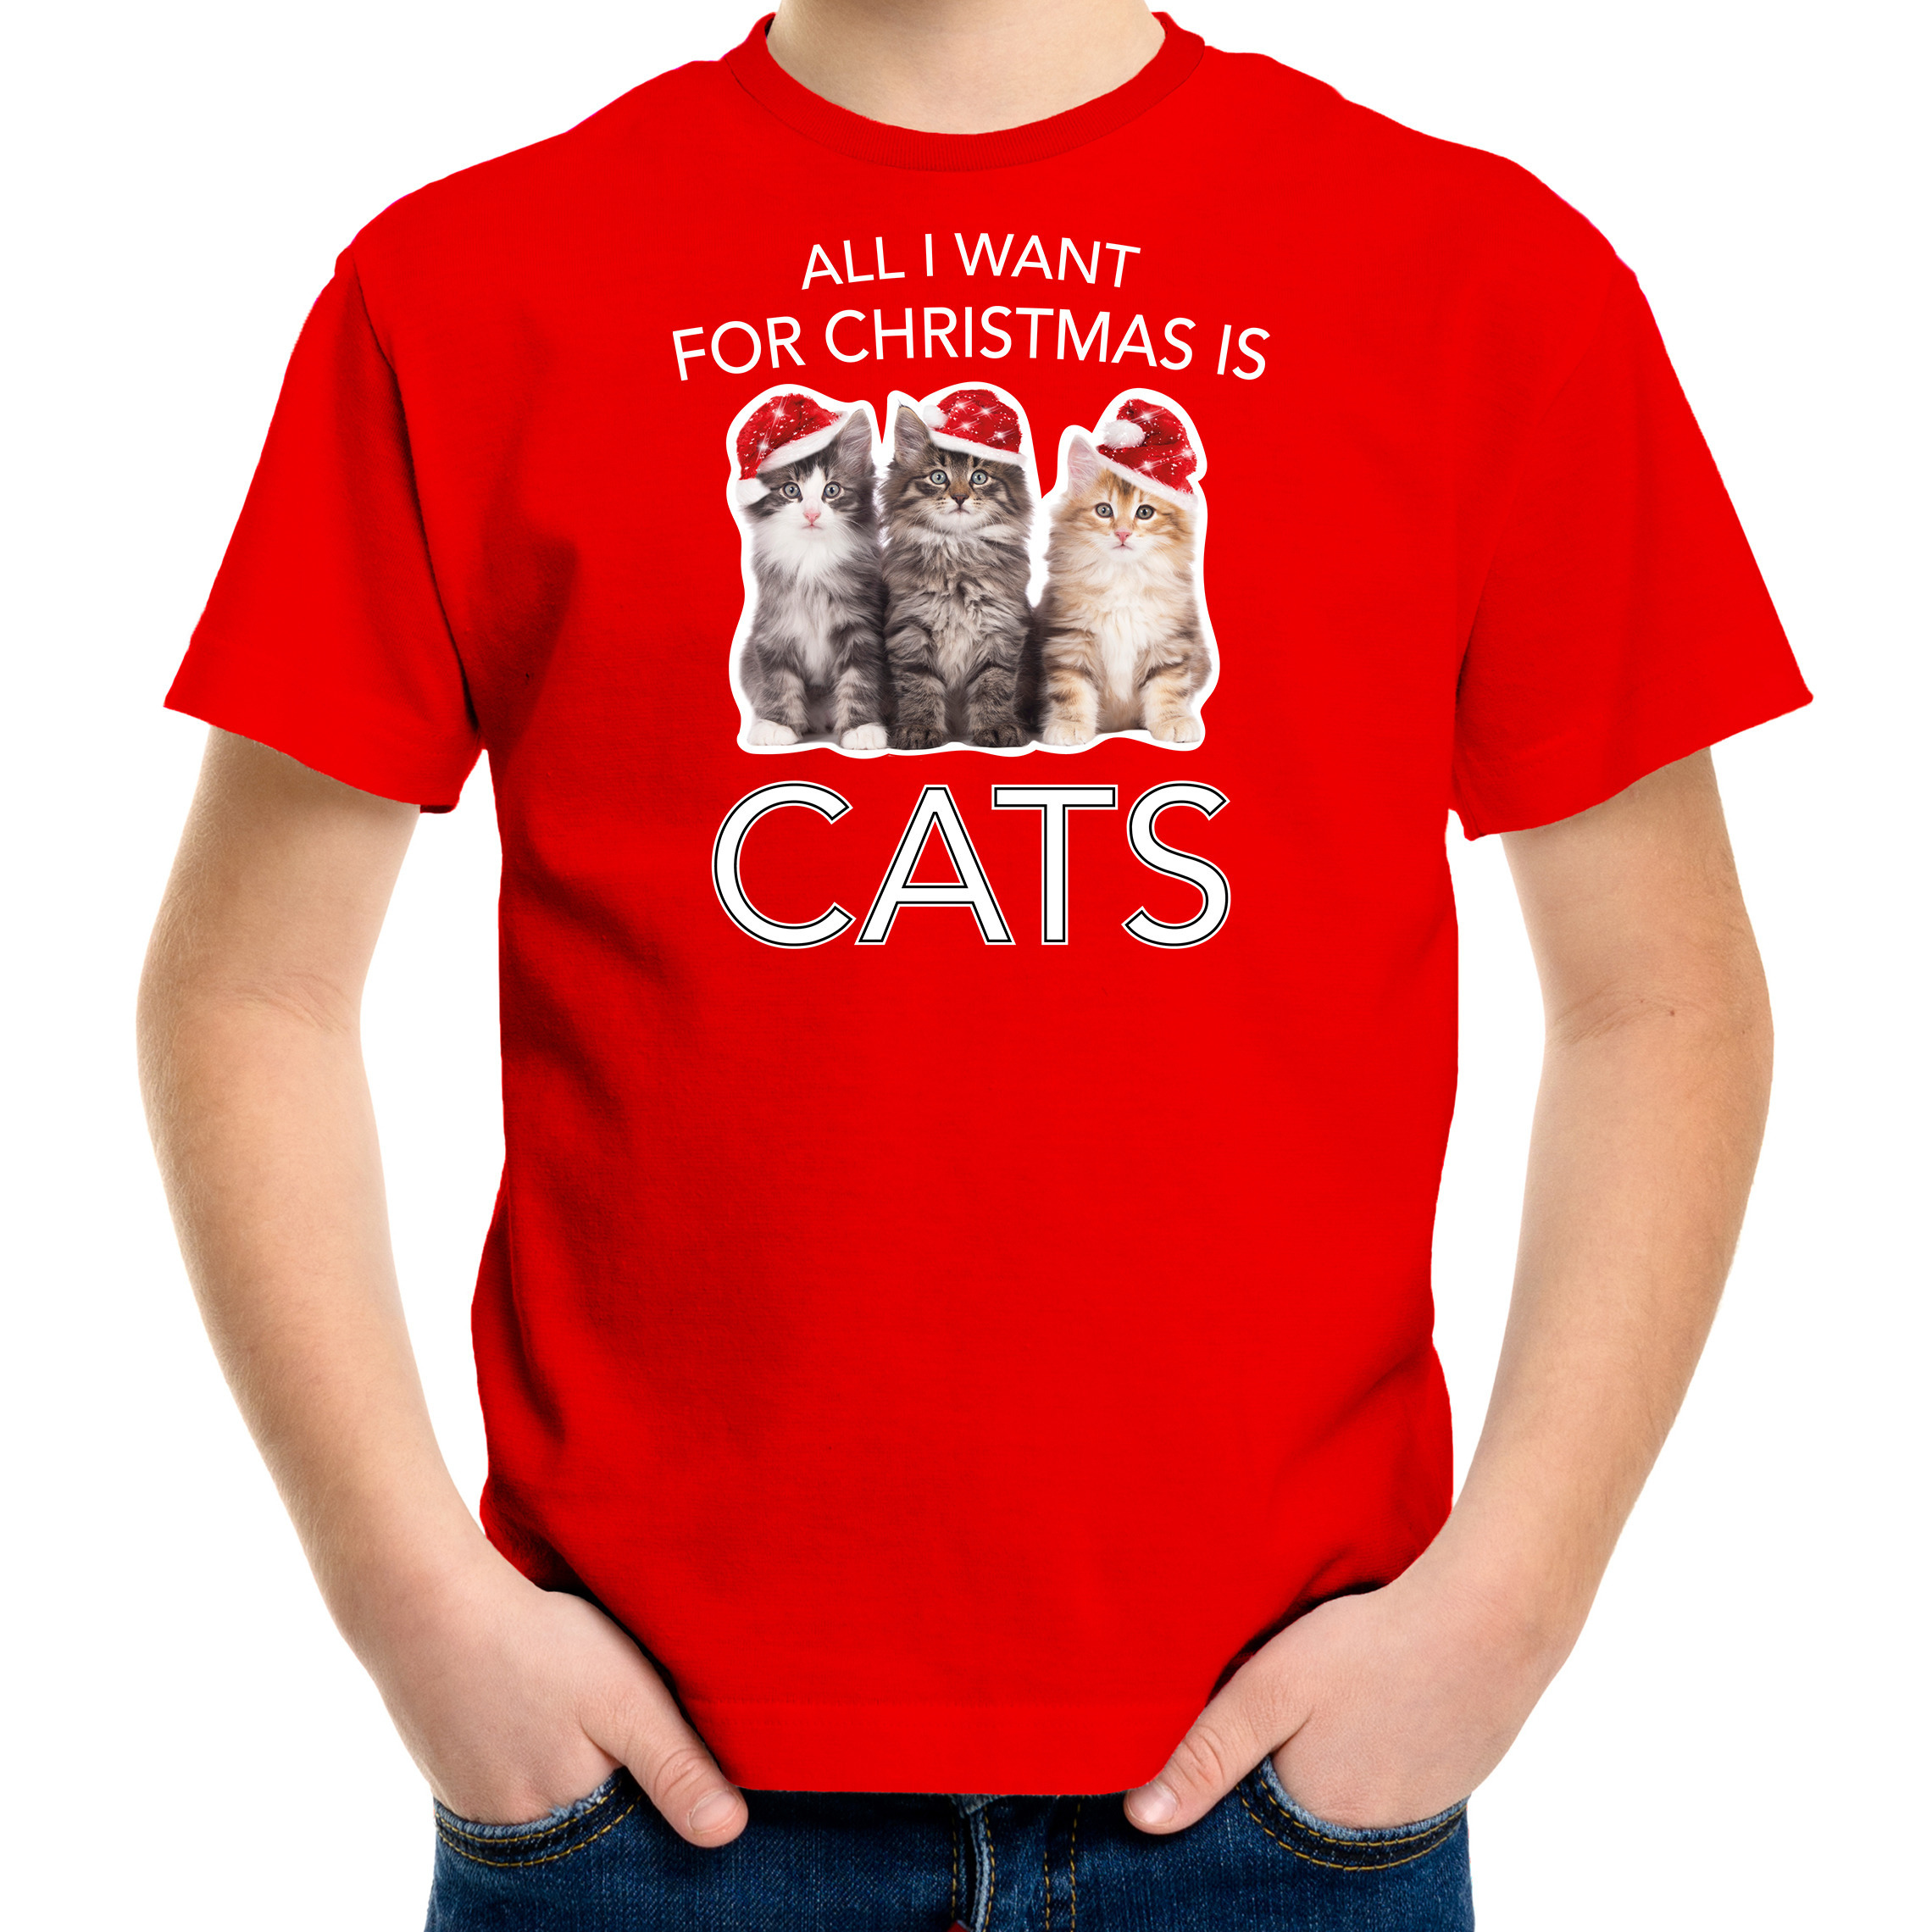 Kitten Kerst t-shirt - outfit All i want for Christmas is cats rood voor kinderen